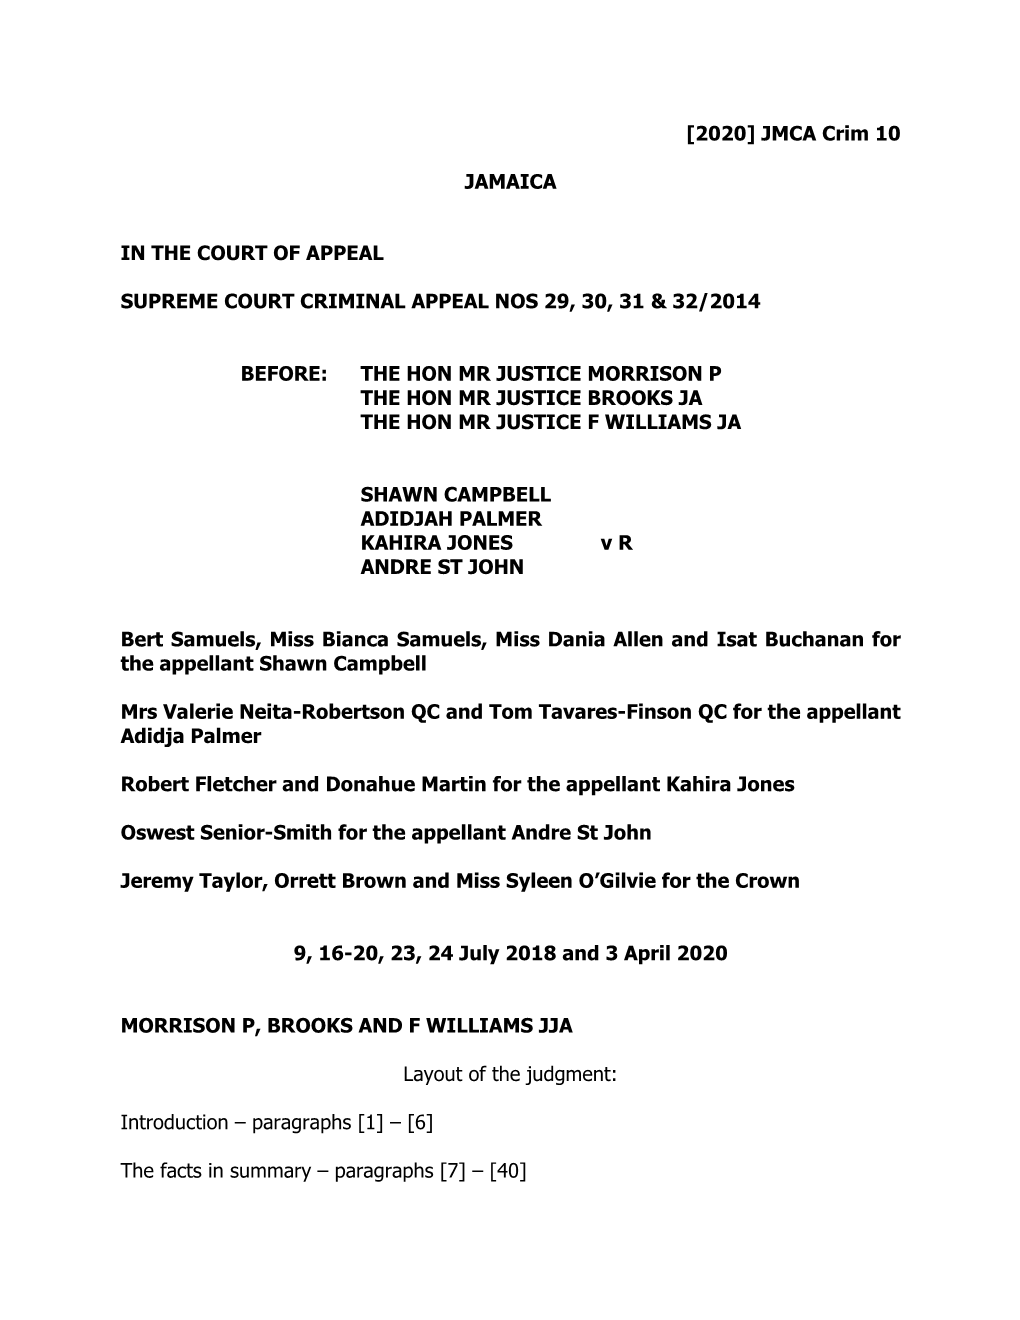 [2020] JMCA Crim 10 JAMAICA in the COURT of APPEAL SUPREME COURT CRIMINAL APPEAL NOS 29, 30, 31 & 32/2014 BEFORE: the HON MR